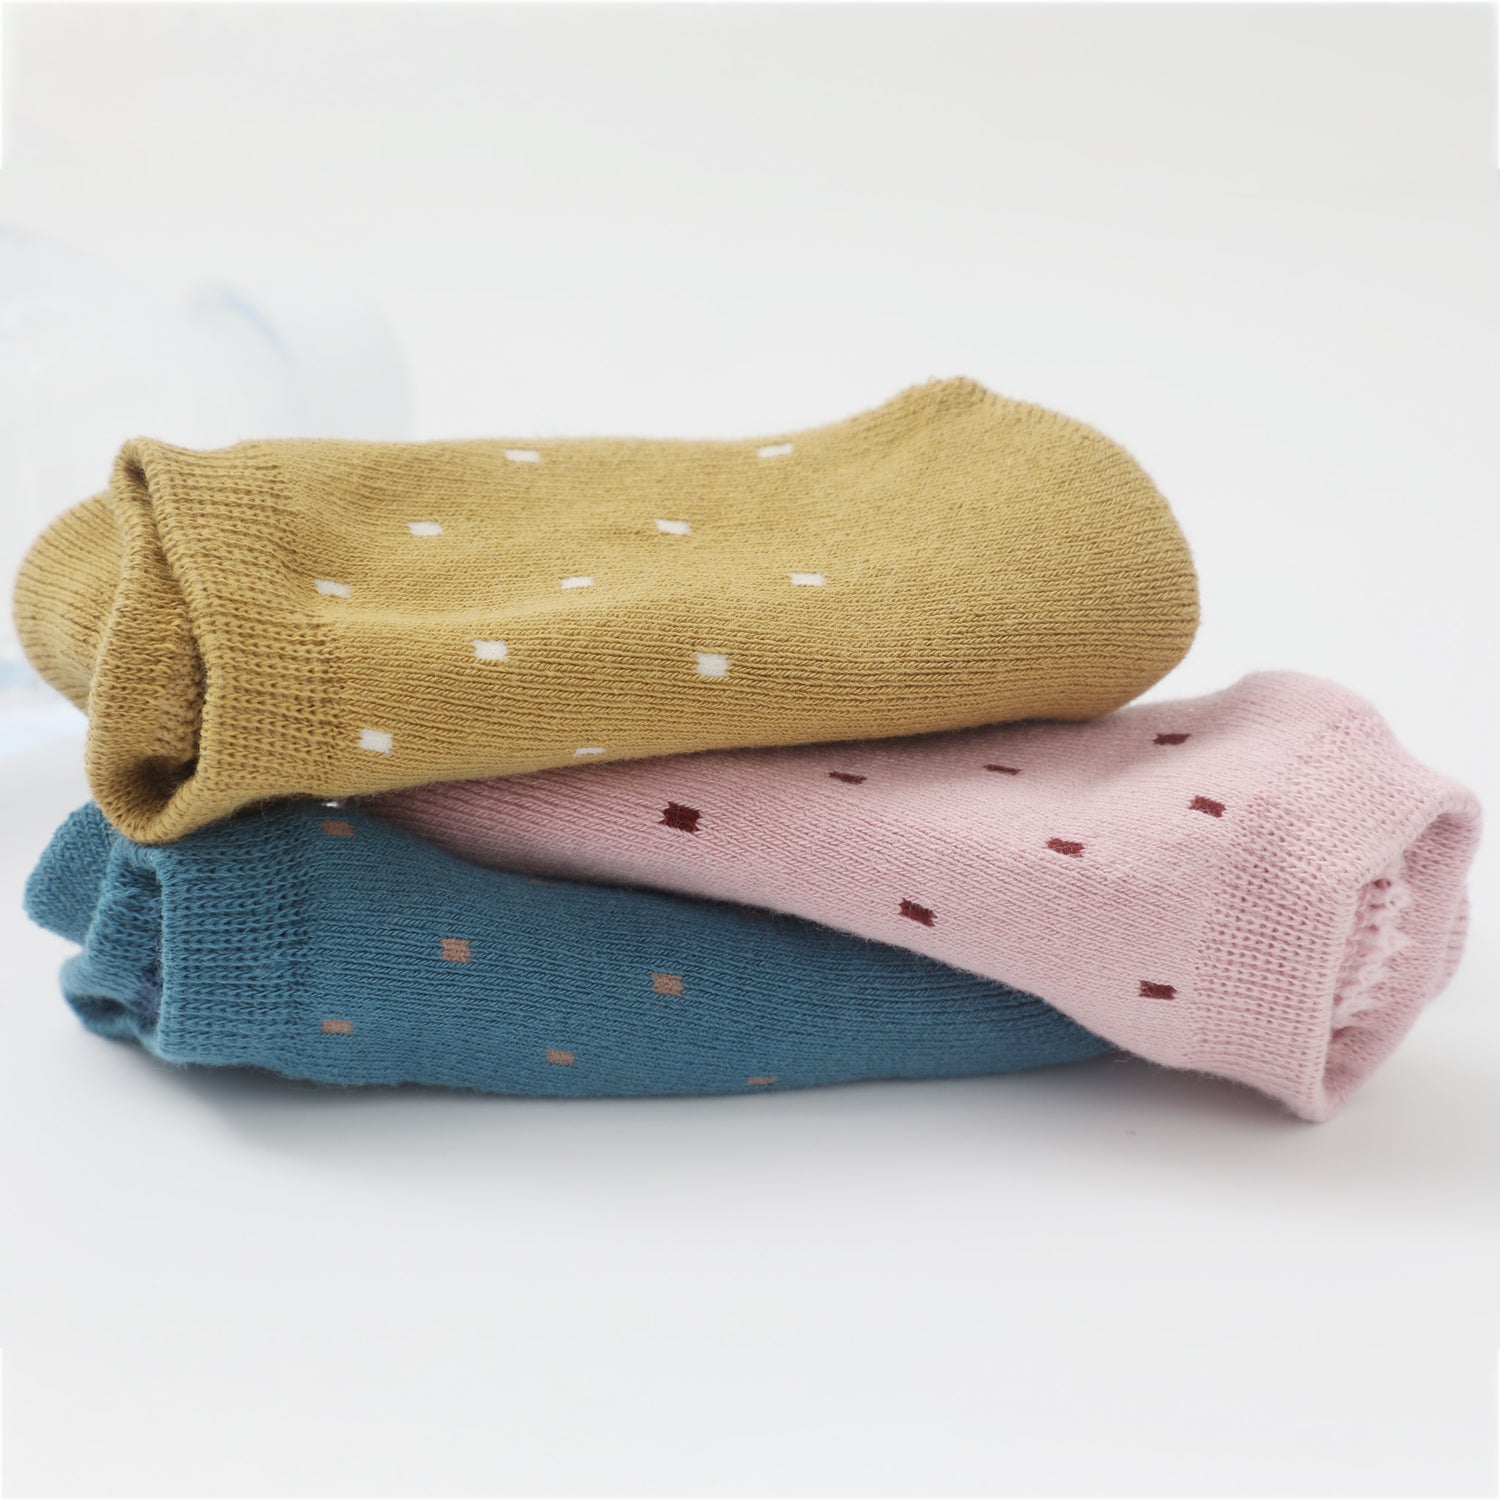 Comfortable ankle socks equipped with grips for a secure and snug fit for little ones.